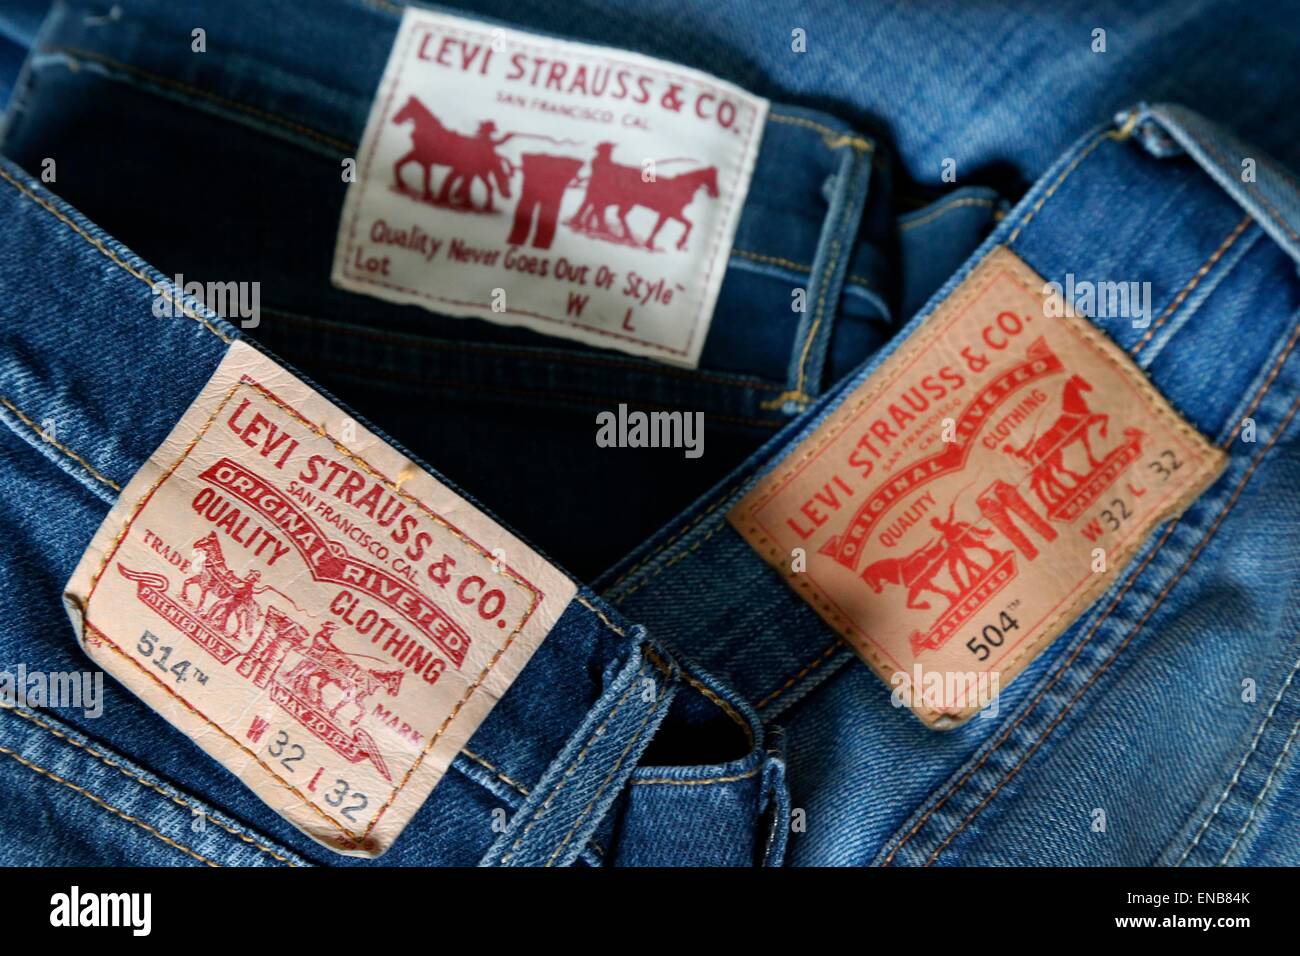 levis strauss & co jeans